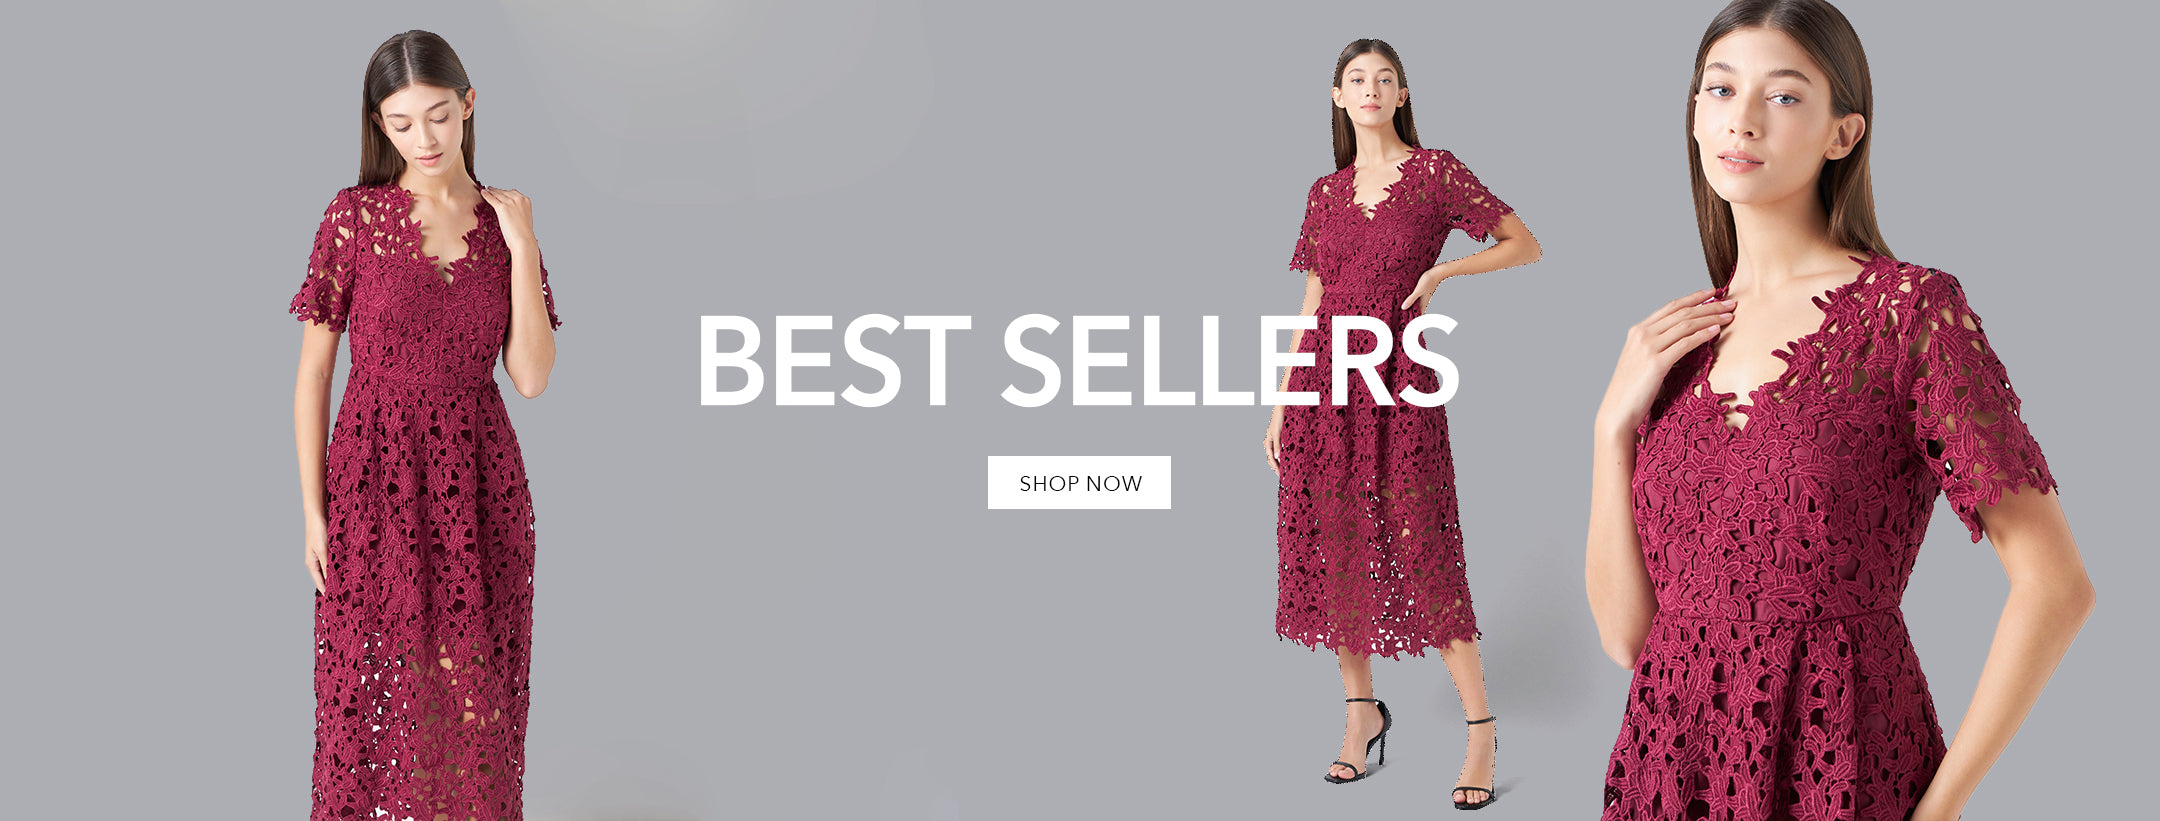 Shop the Best Selling Styles in Women's Clothing at 27augustapparel.com